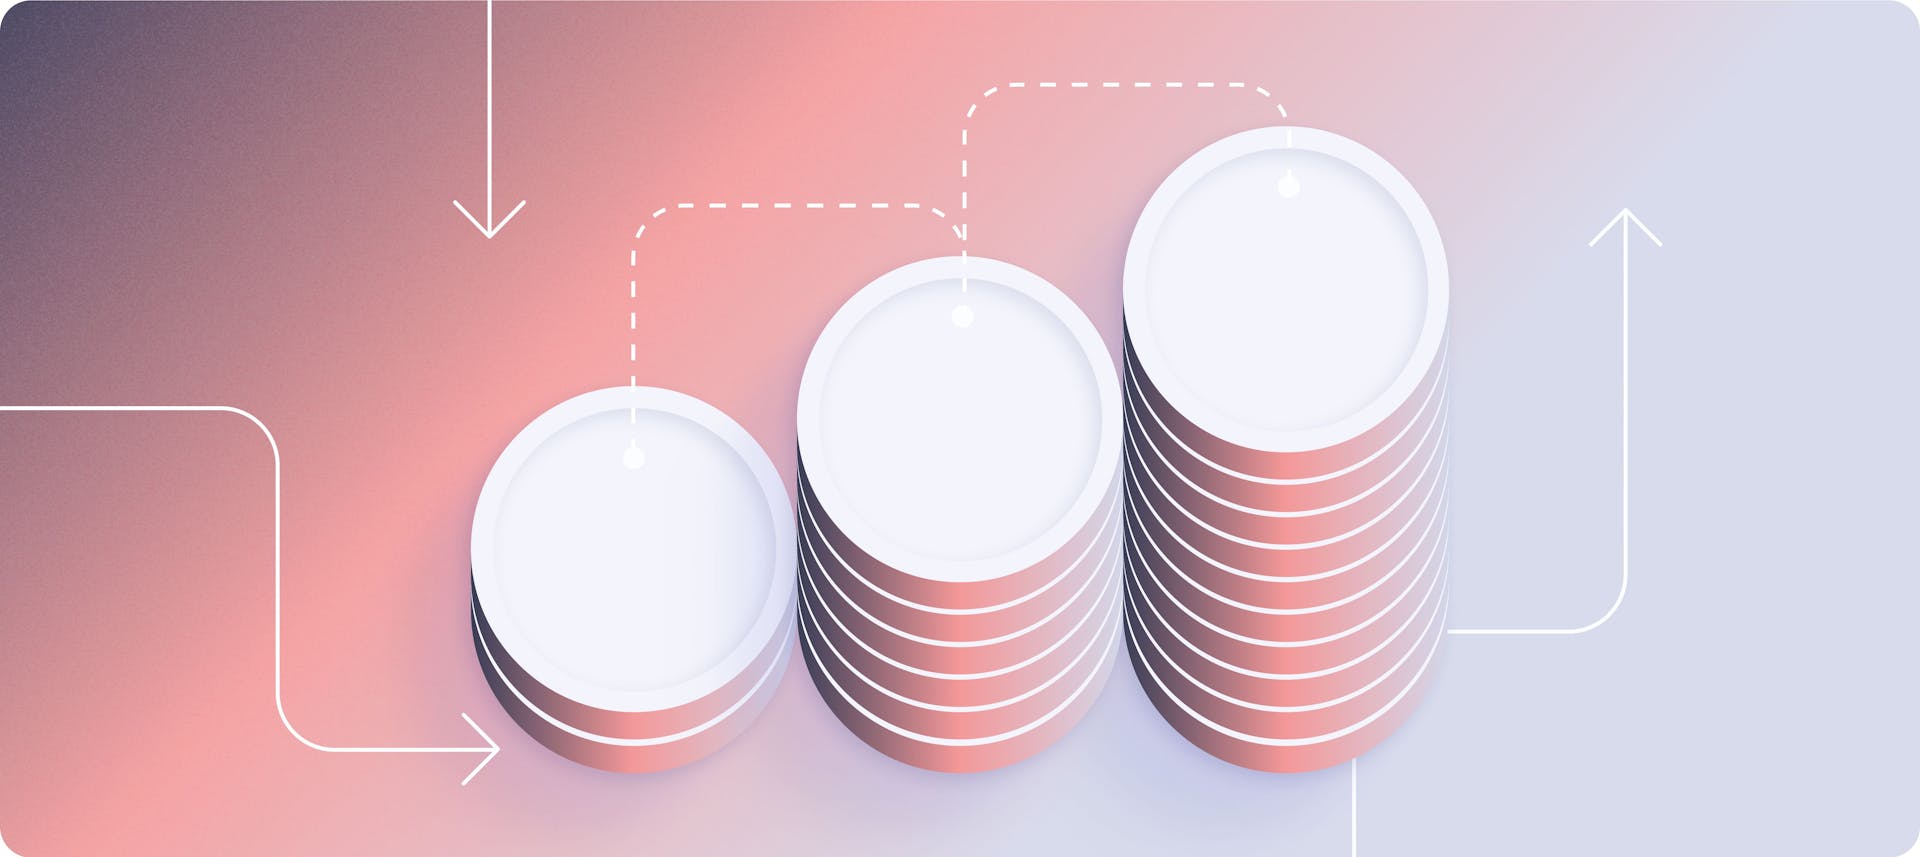 Illustration of coin stacks for blog post about fundraising with Meka Asonye | Mercury